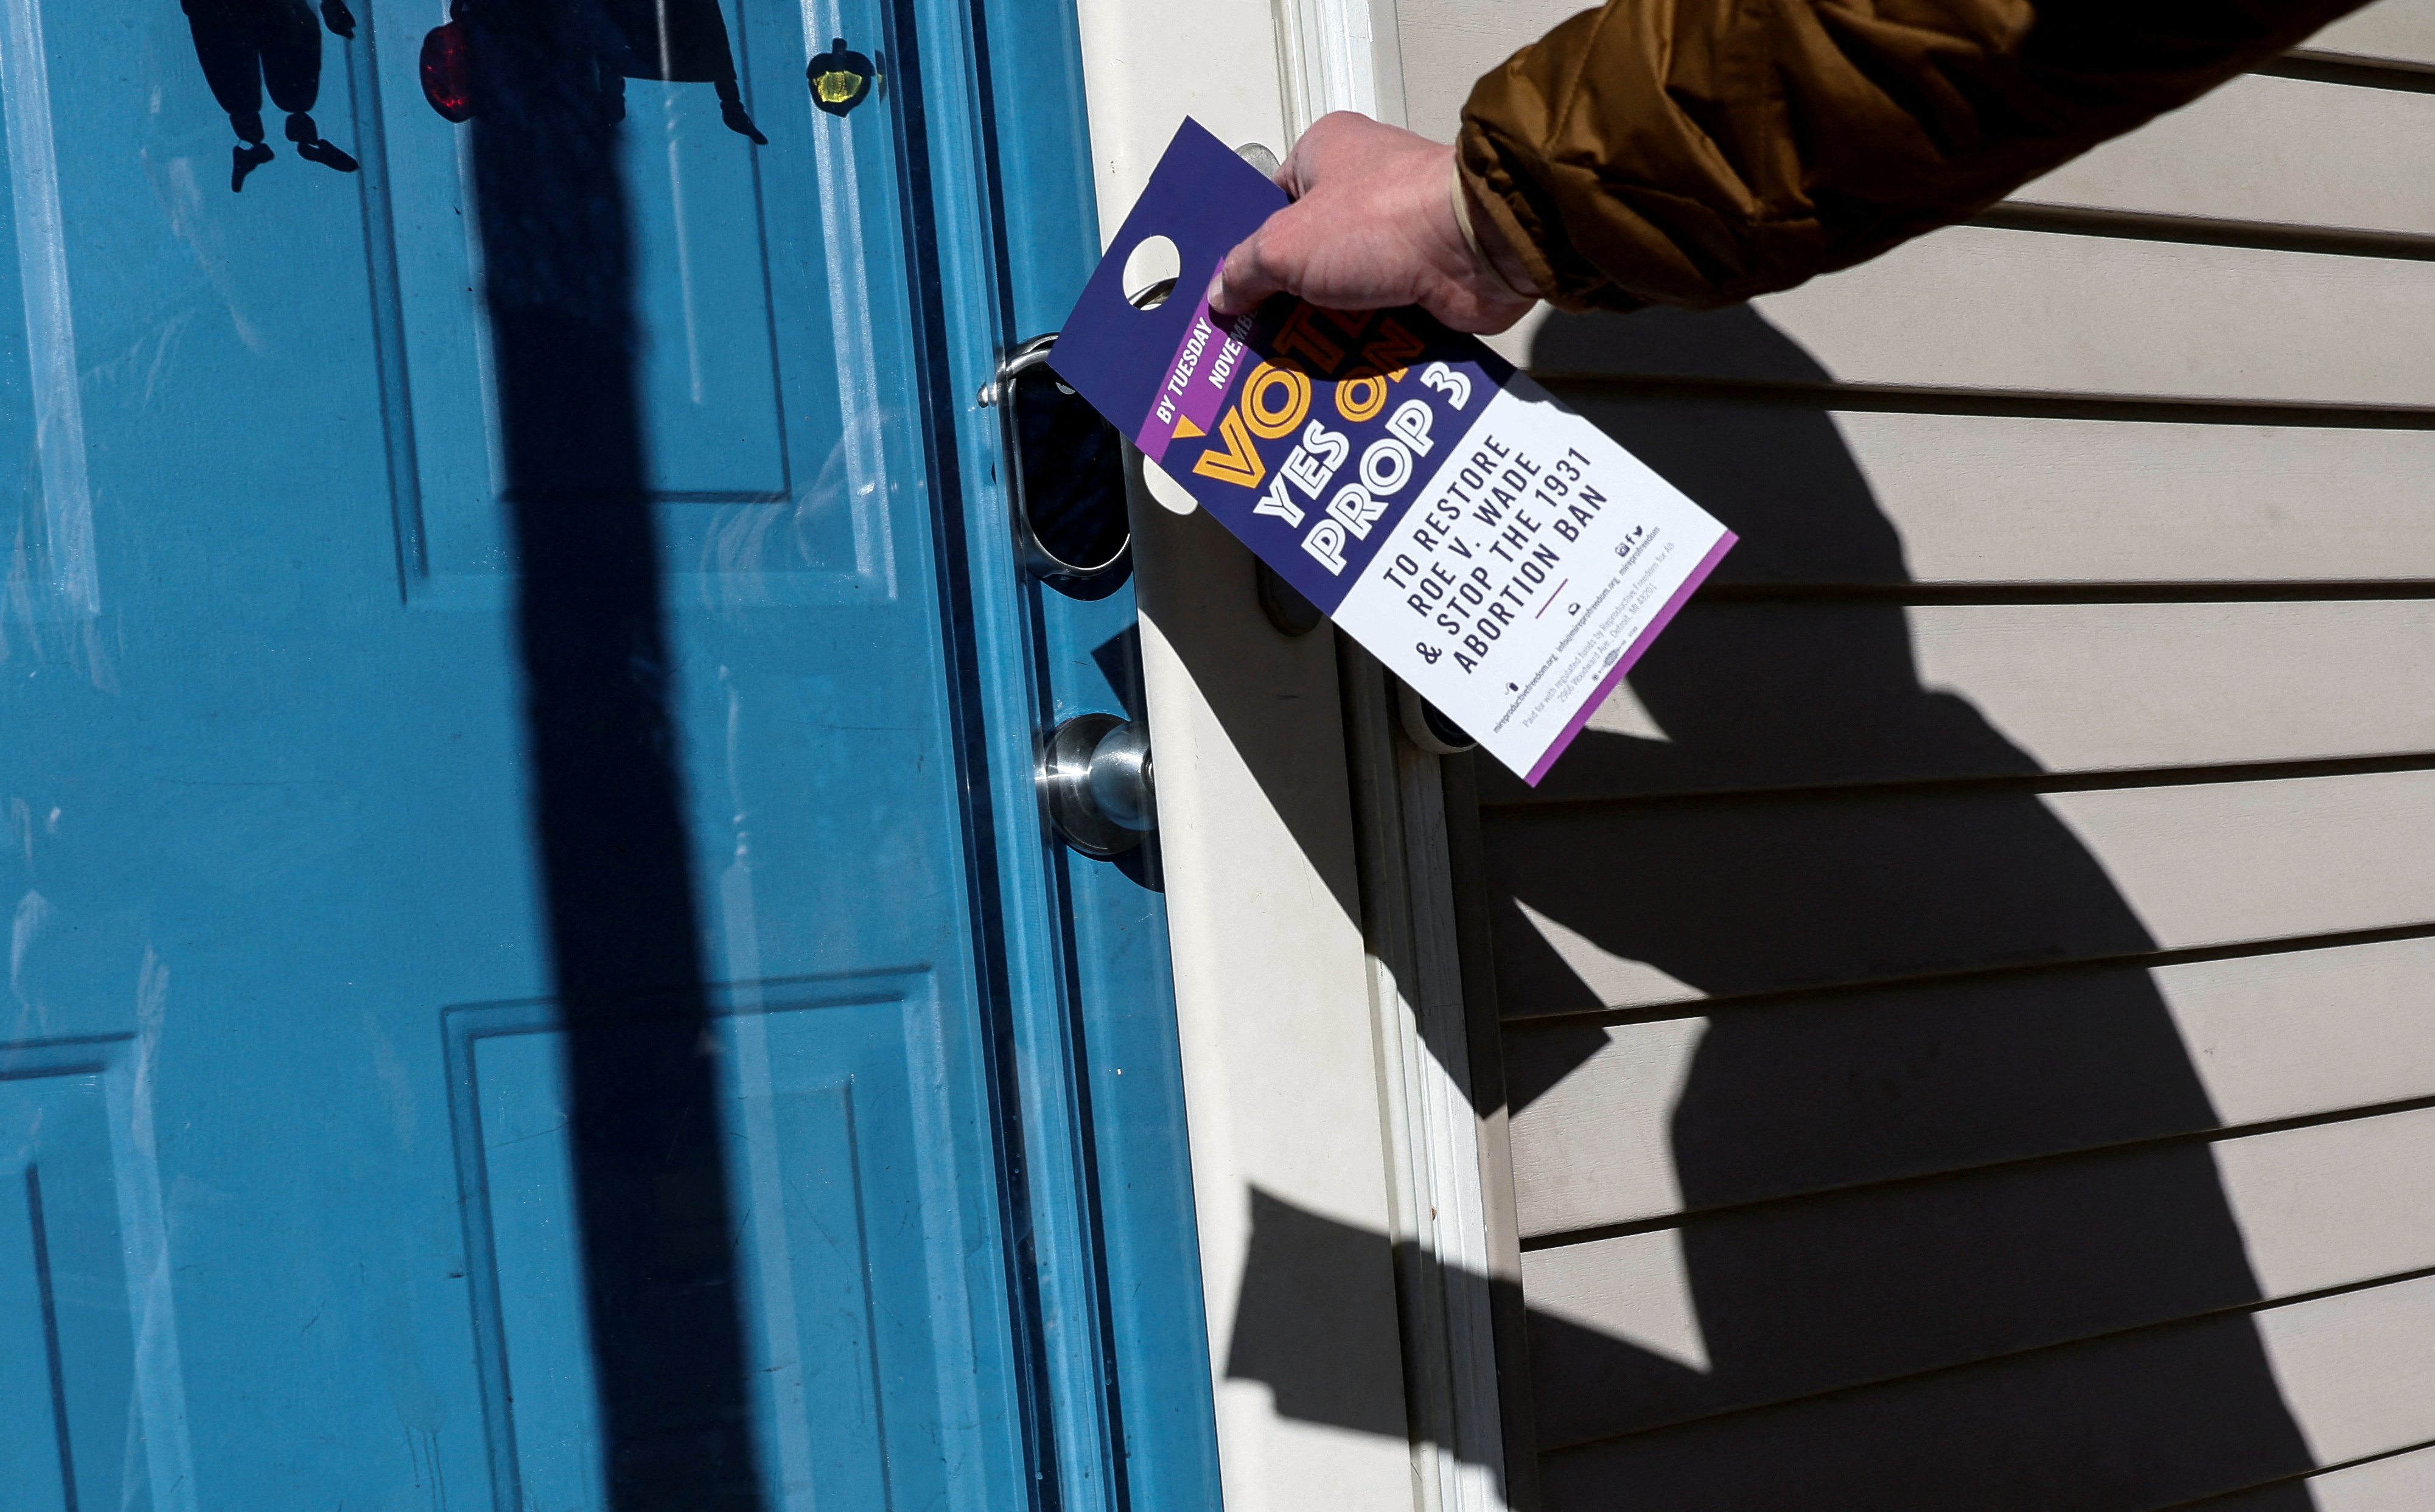 Canvassers in support of abortion rights knock on doors ahead of the midterm election in Michigan